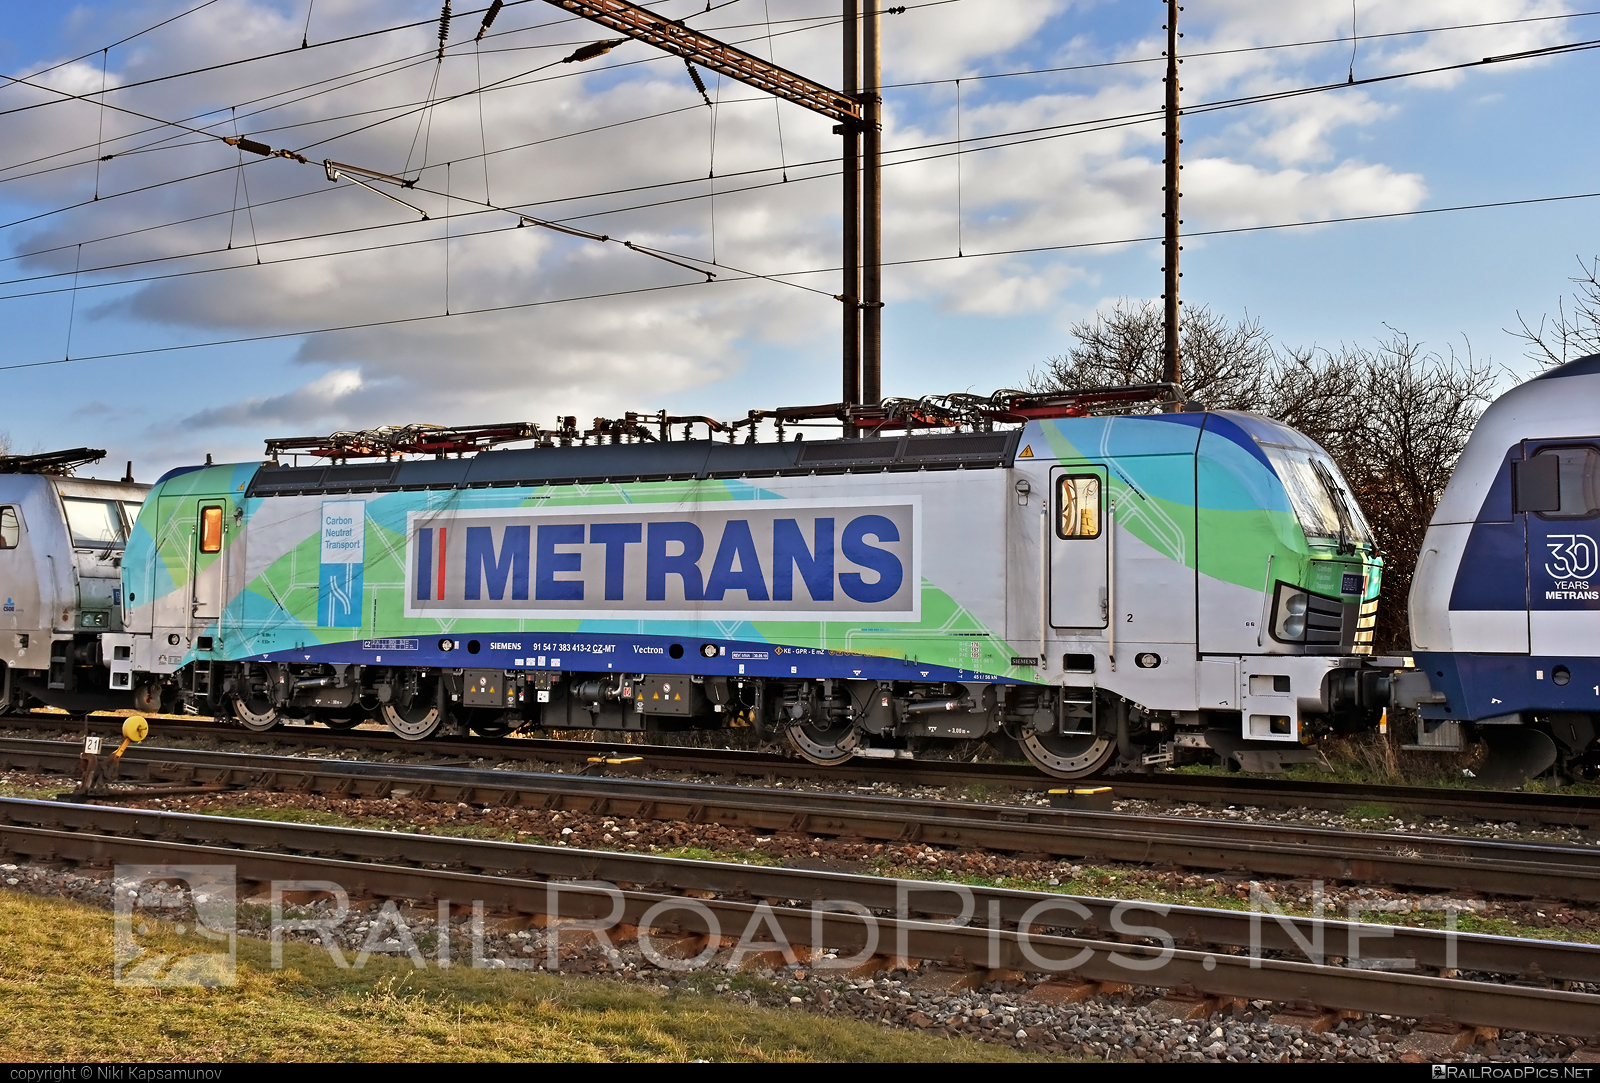 Siemens Vectron MS - 383 413-2 operated by METRANS, a.s. #hhla #metrans #siemens #siemensVectron #siemensVectronMS #vectron #vectronMS